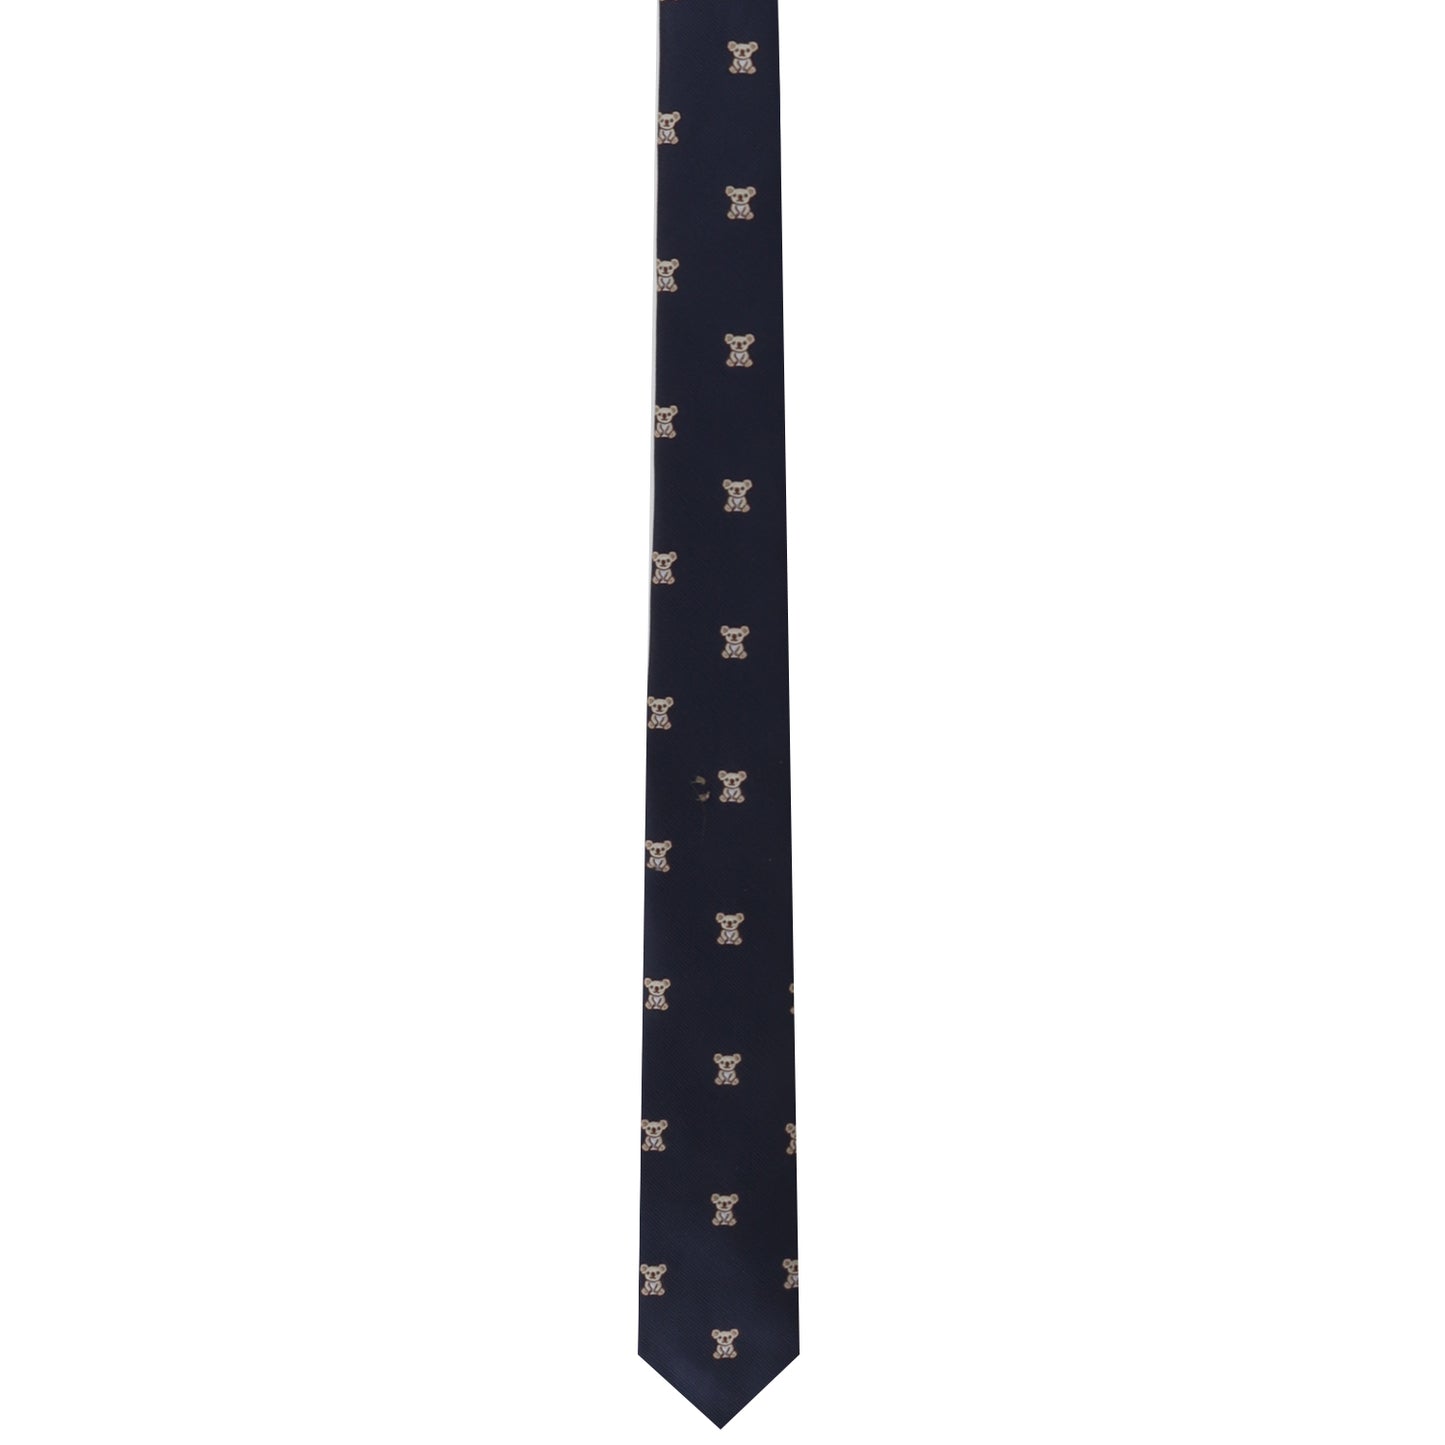 A navy blue Koala Skinny Tie featuring a pattern of small beige X-shaped symbols, emanating an understated charm evenly distributed throughout the fabric.